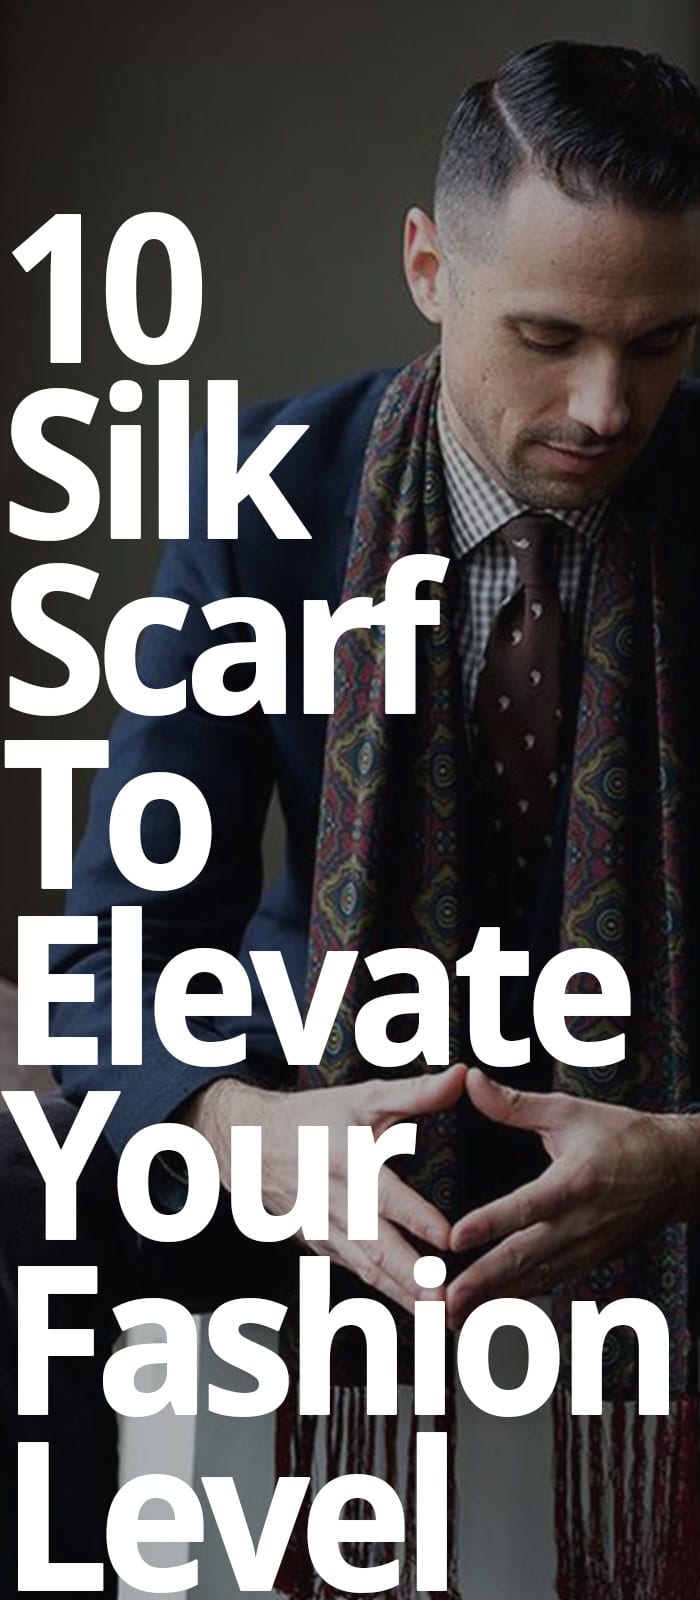 10 SILK SCARF TO ELEVATE YOUR FASHION